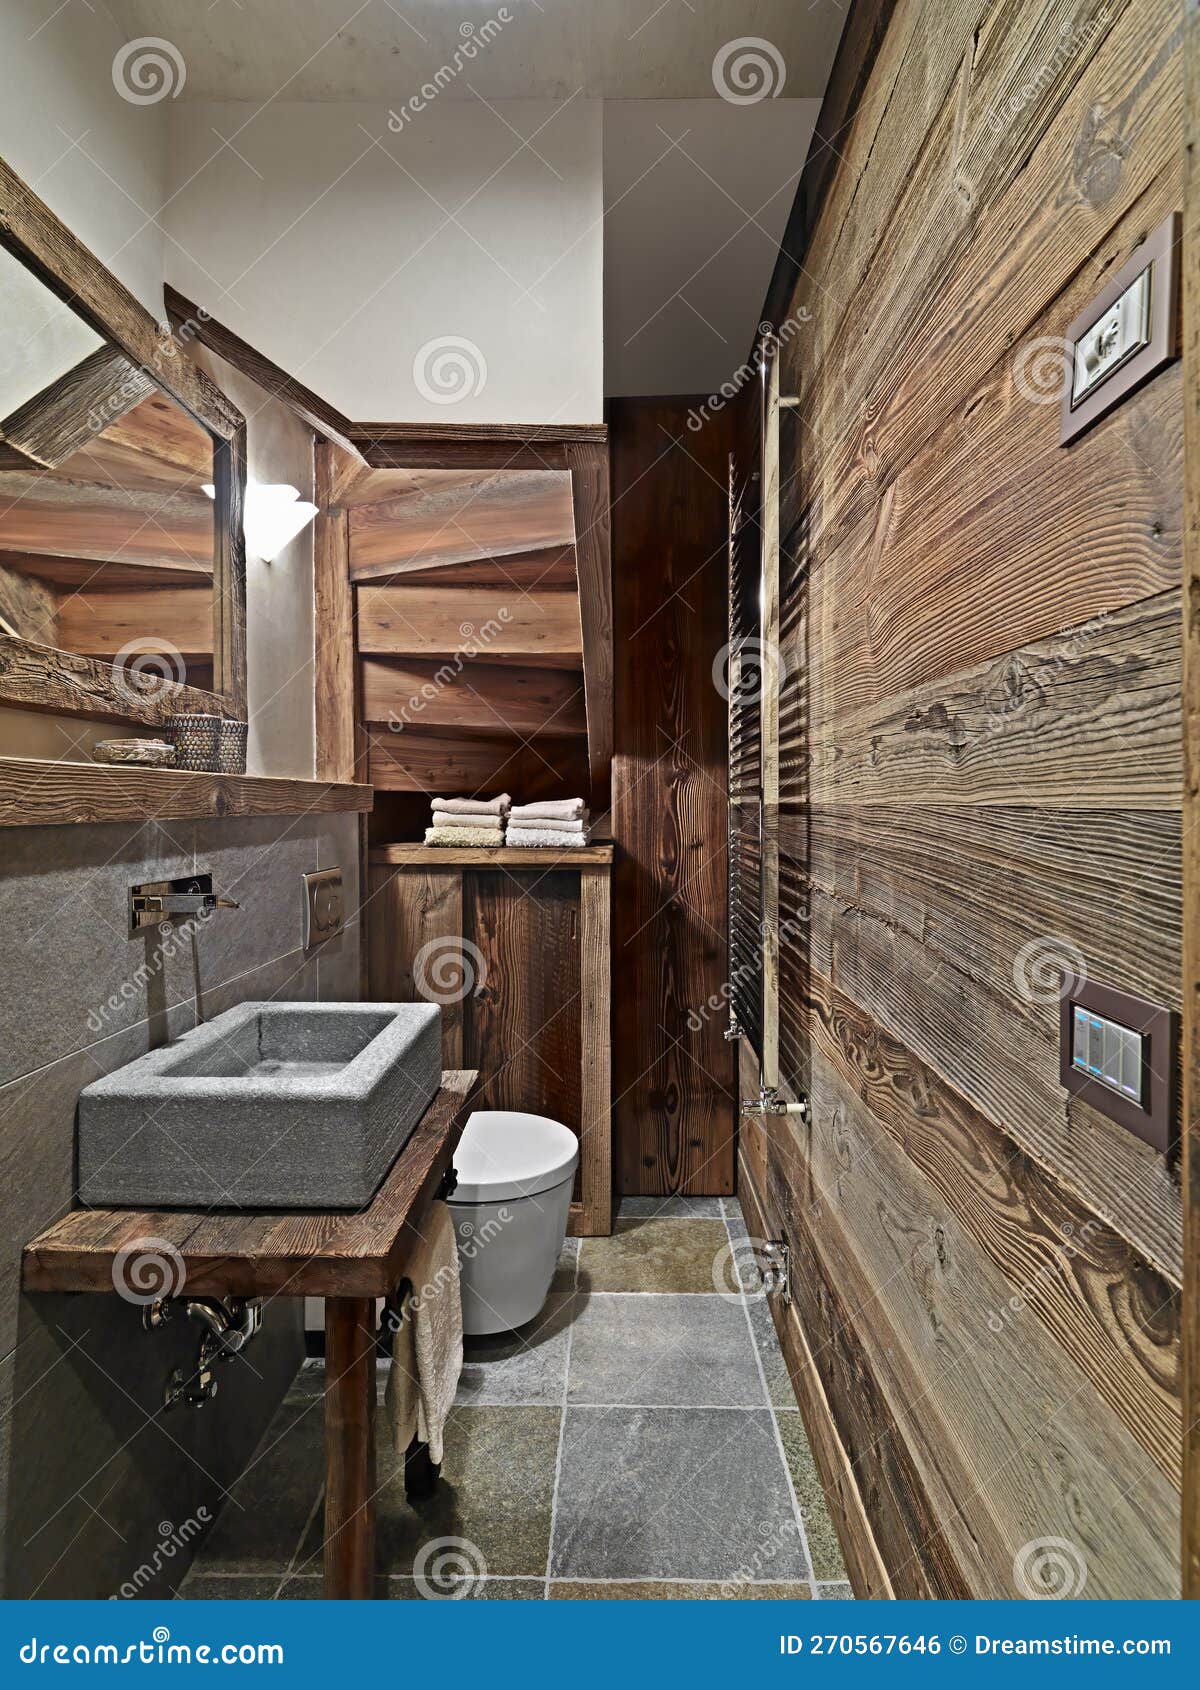 interior view of a rustic bathroom with wainscoting